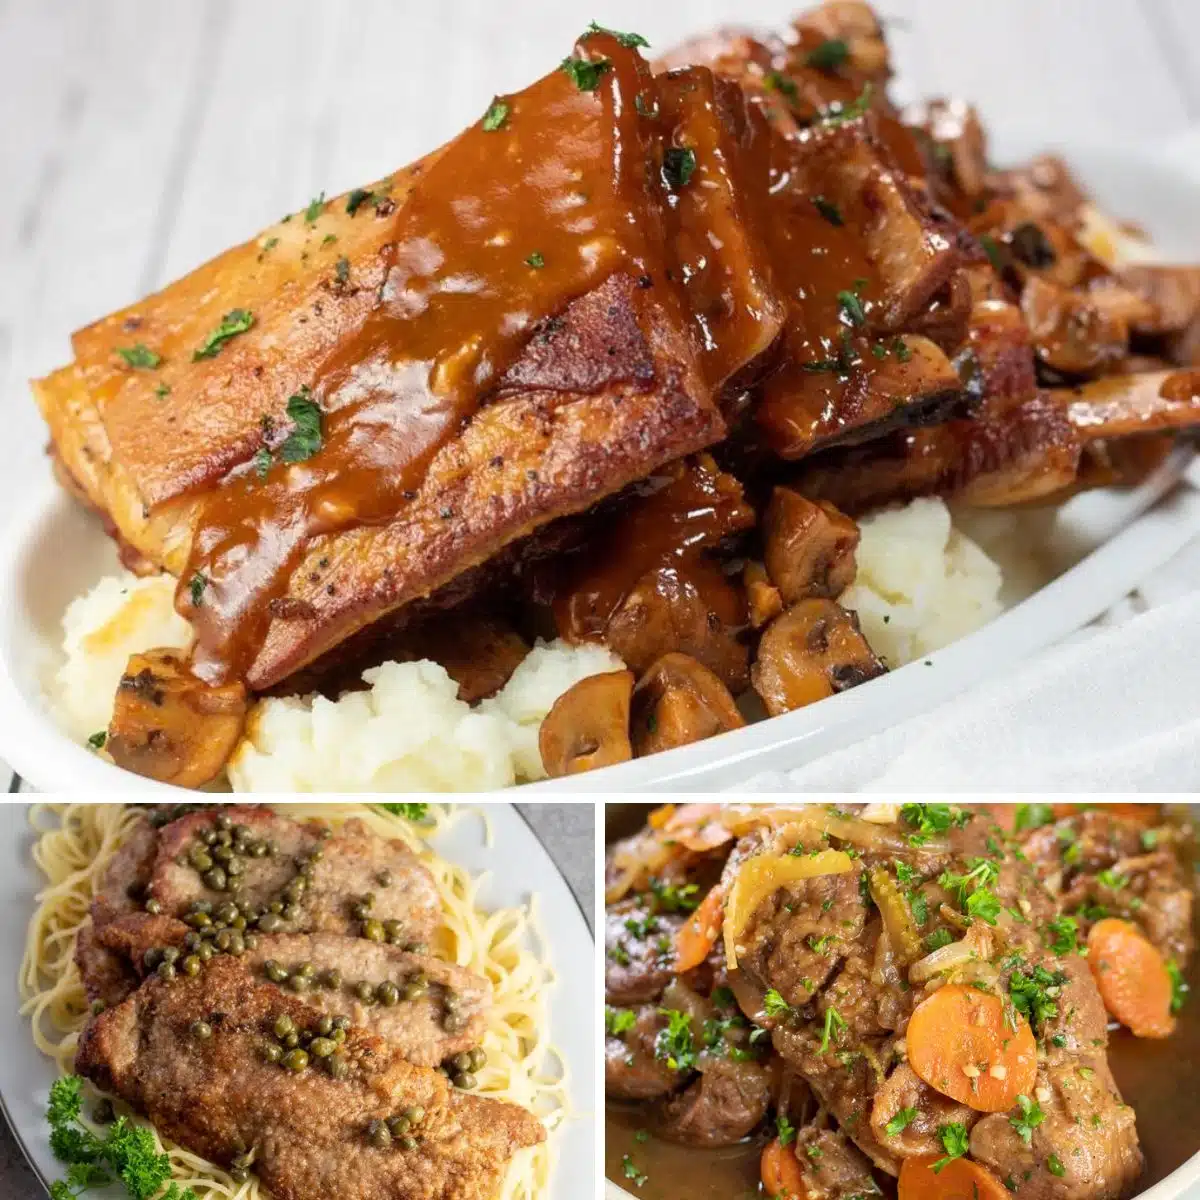 The Best Veal Recipes to make featuring three of my tried and true recipes shared on the page.